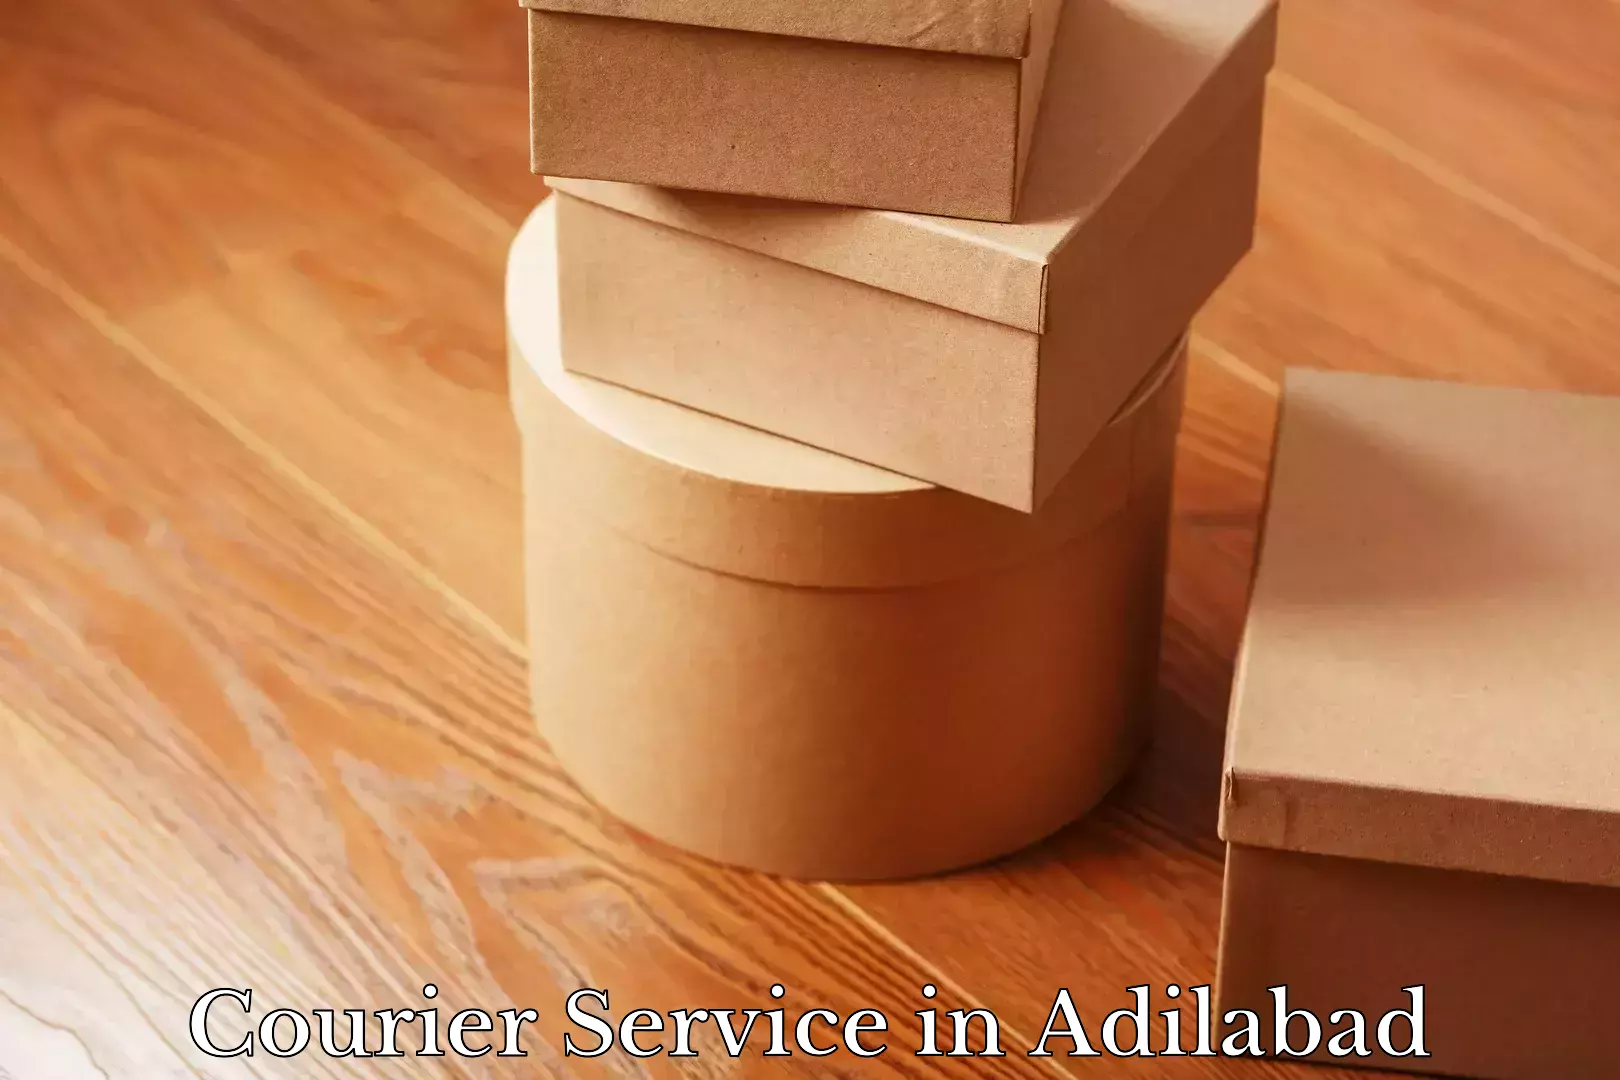 Next-generation courier services in Adilabad